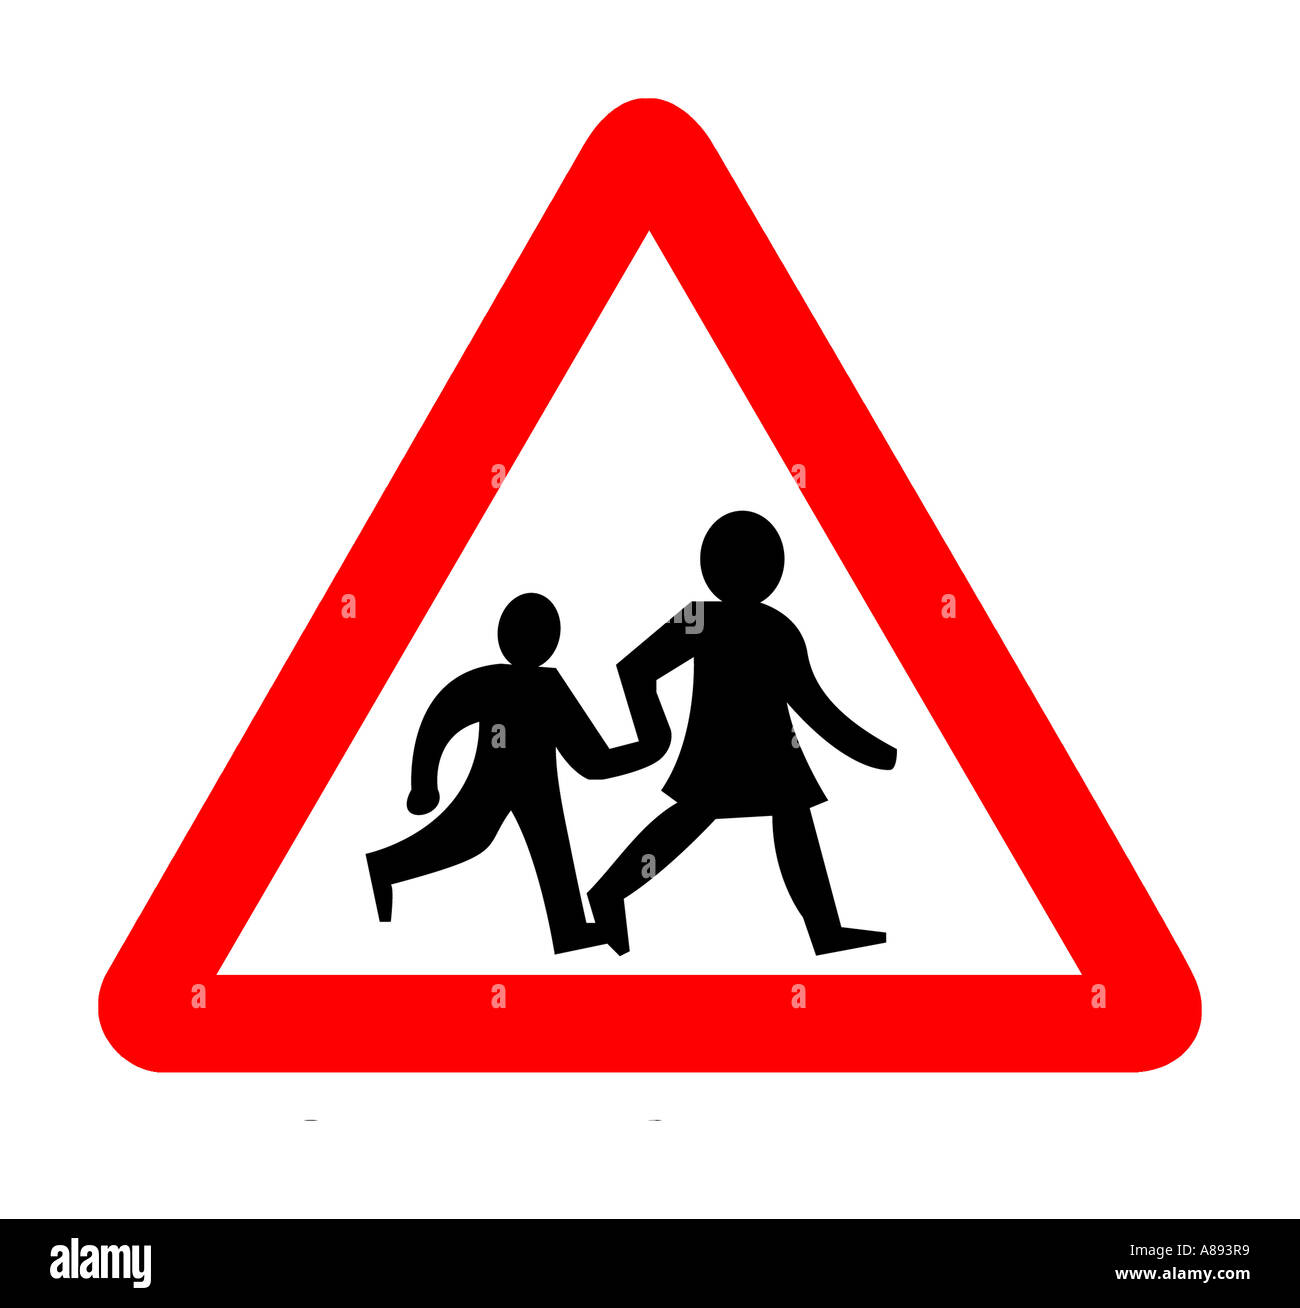 Children Crossing Road sign on white background Stock Photo